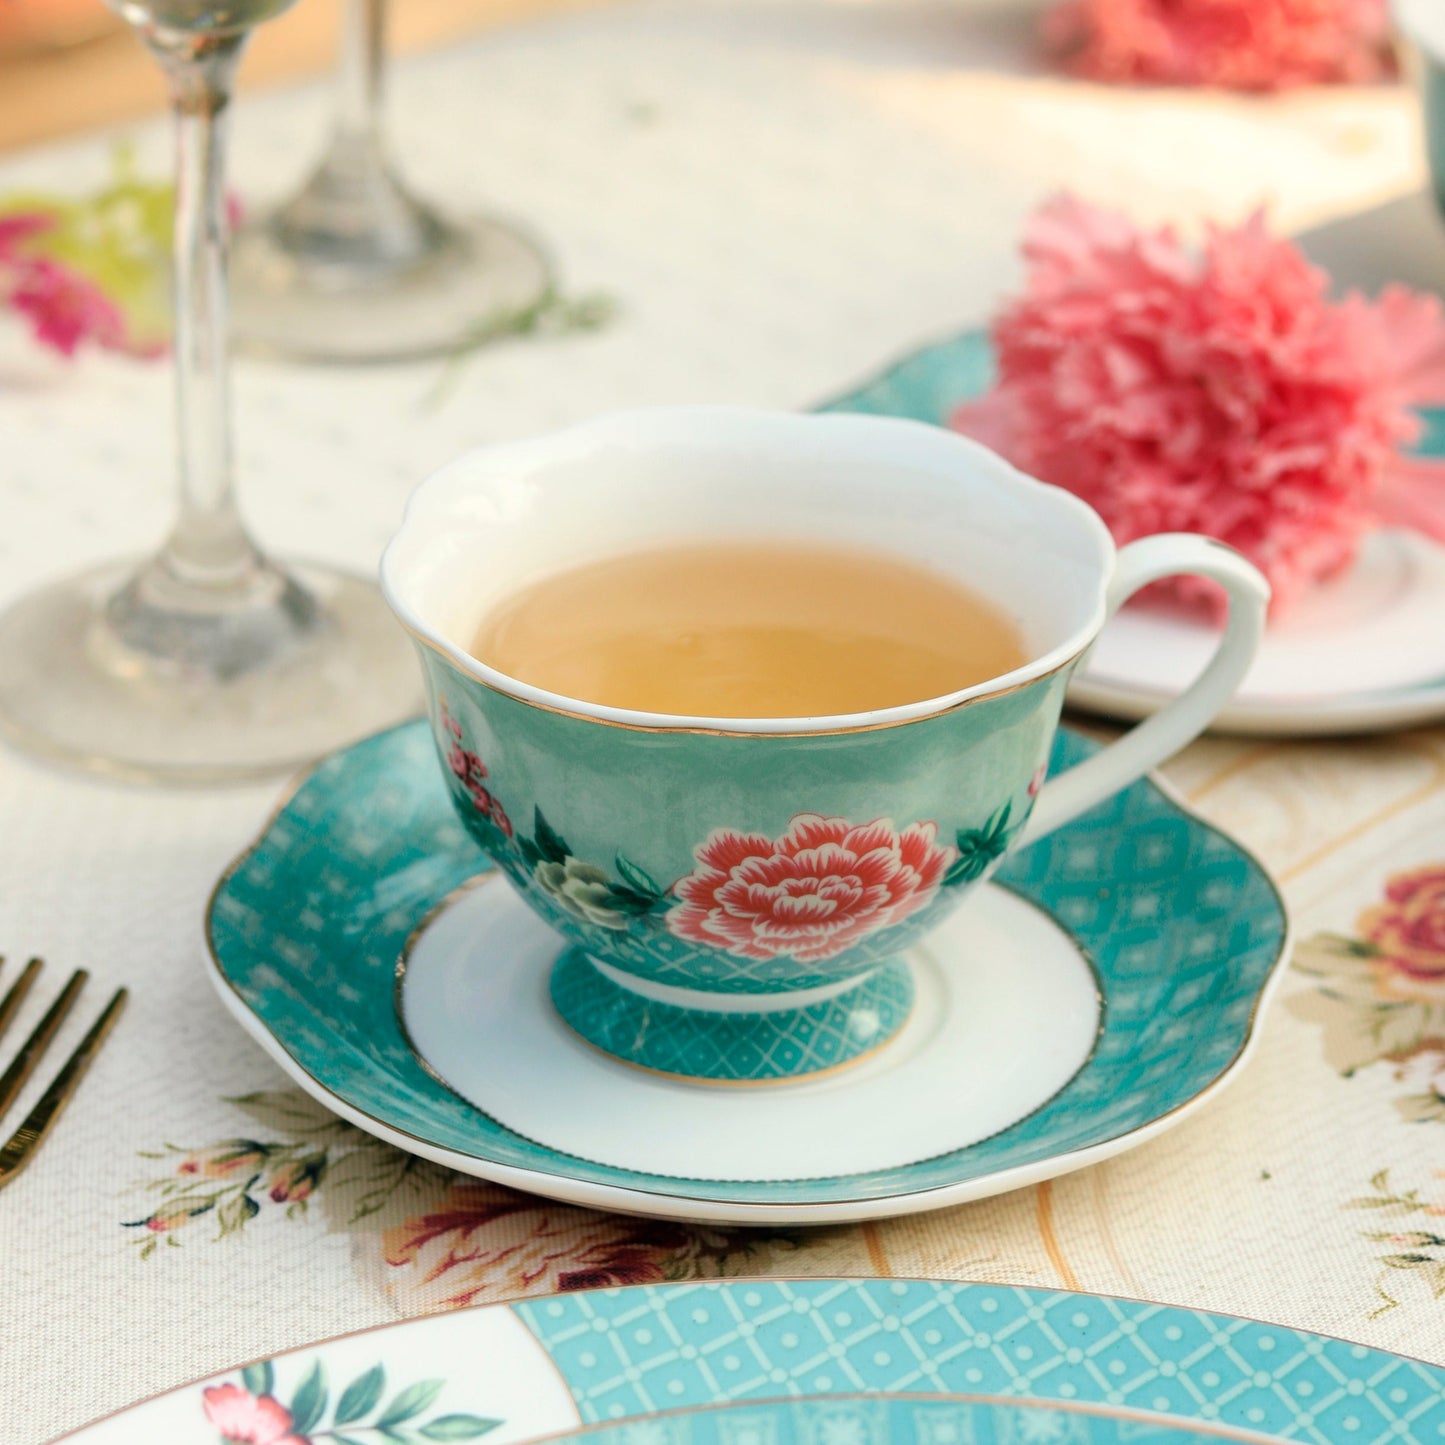 Jade Blossom Cup and Saucer Set (Vintage Collection, 6 Cups and 6 Saucers)